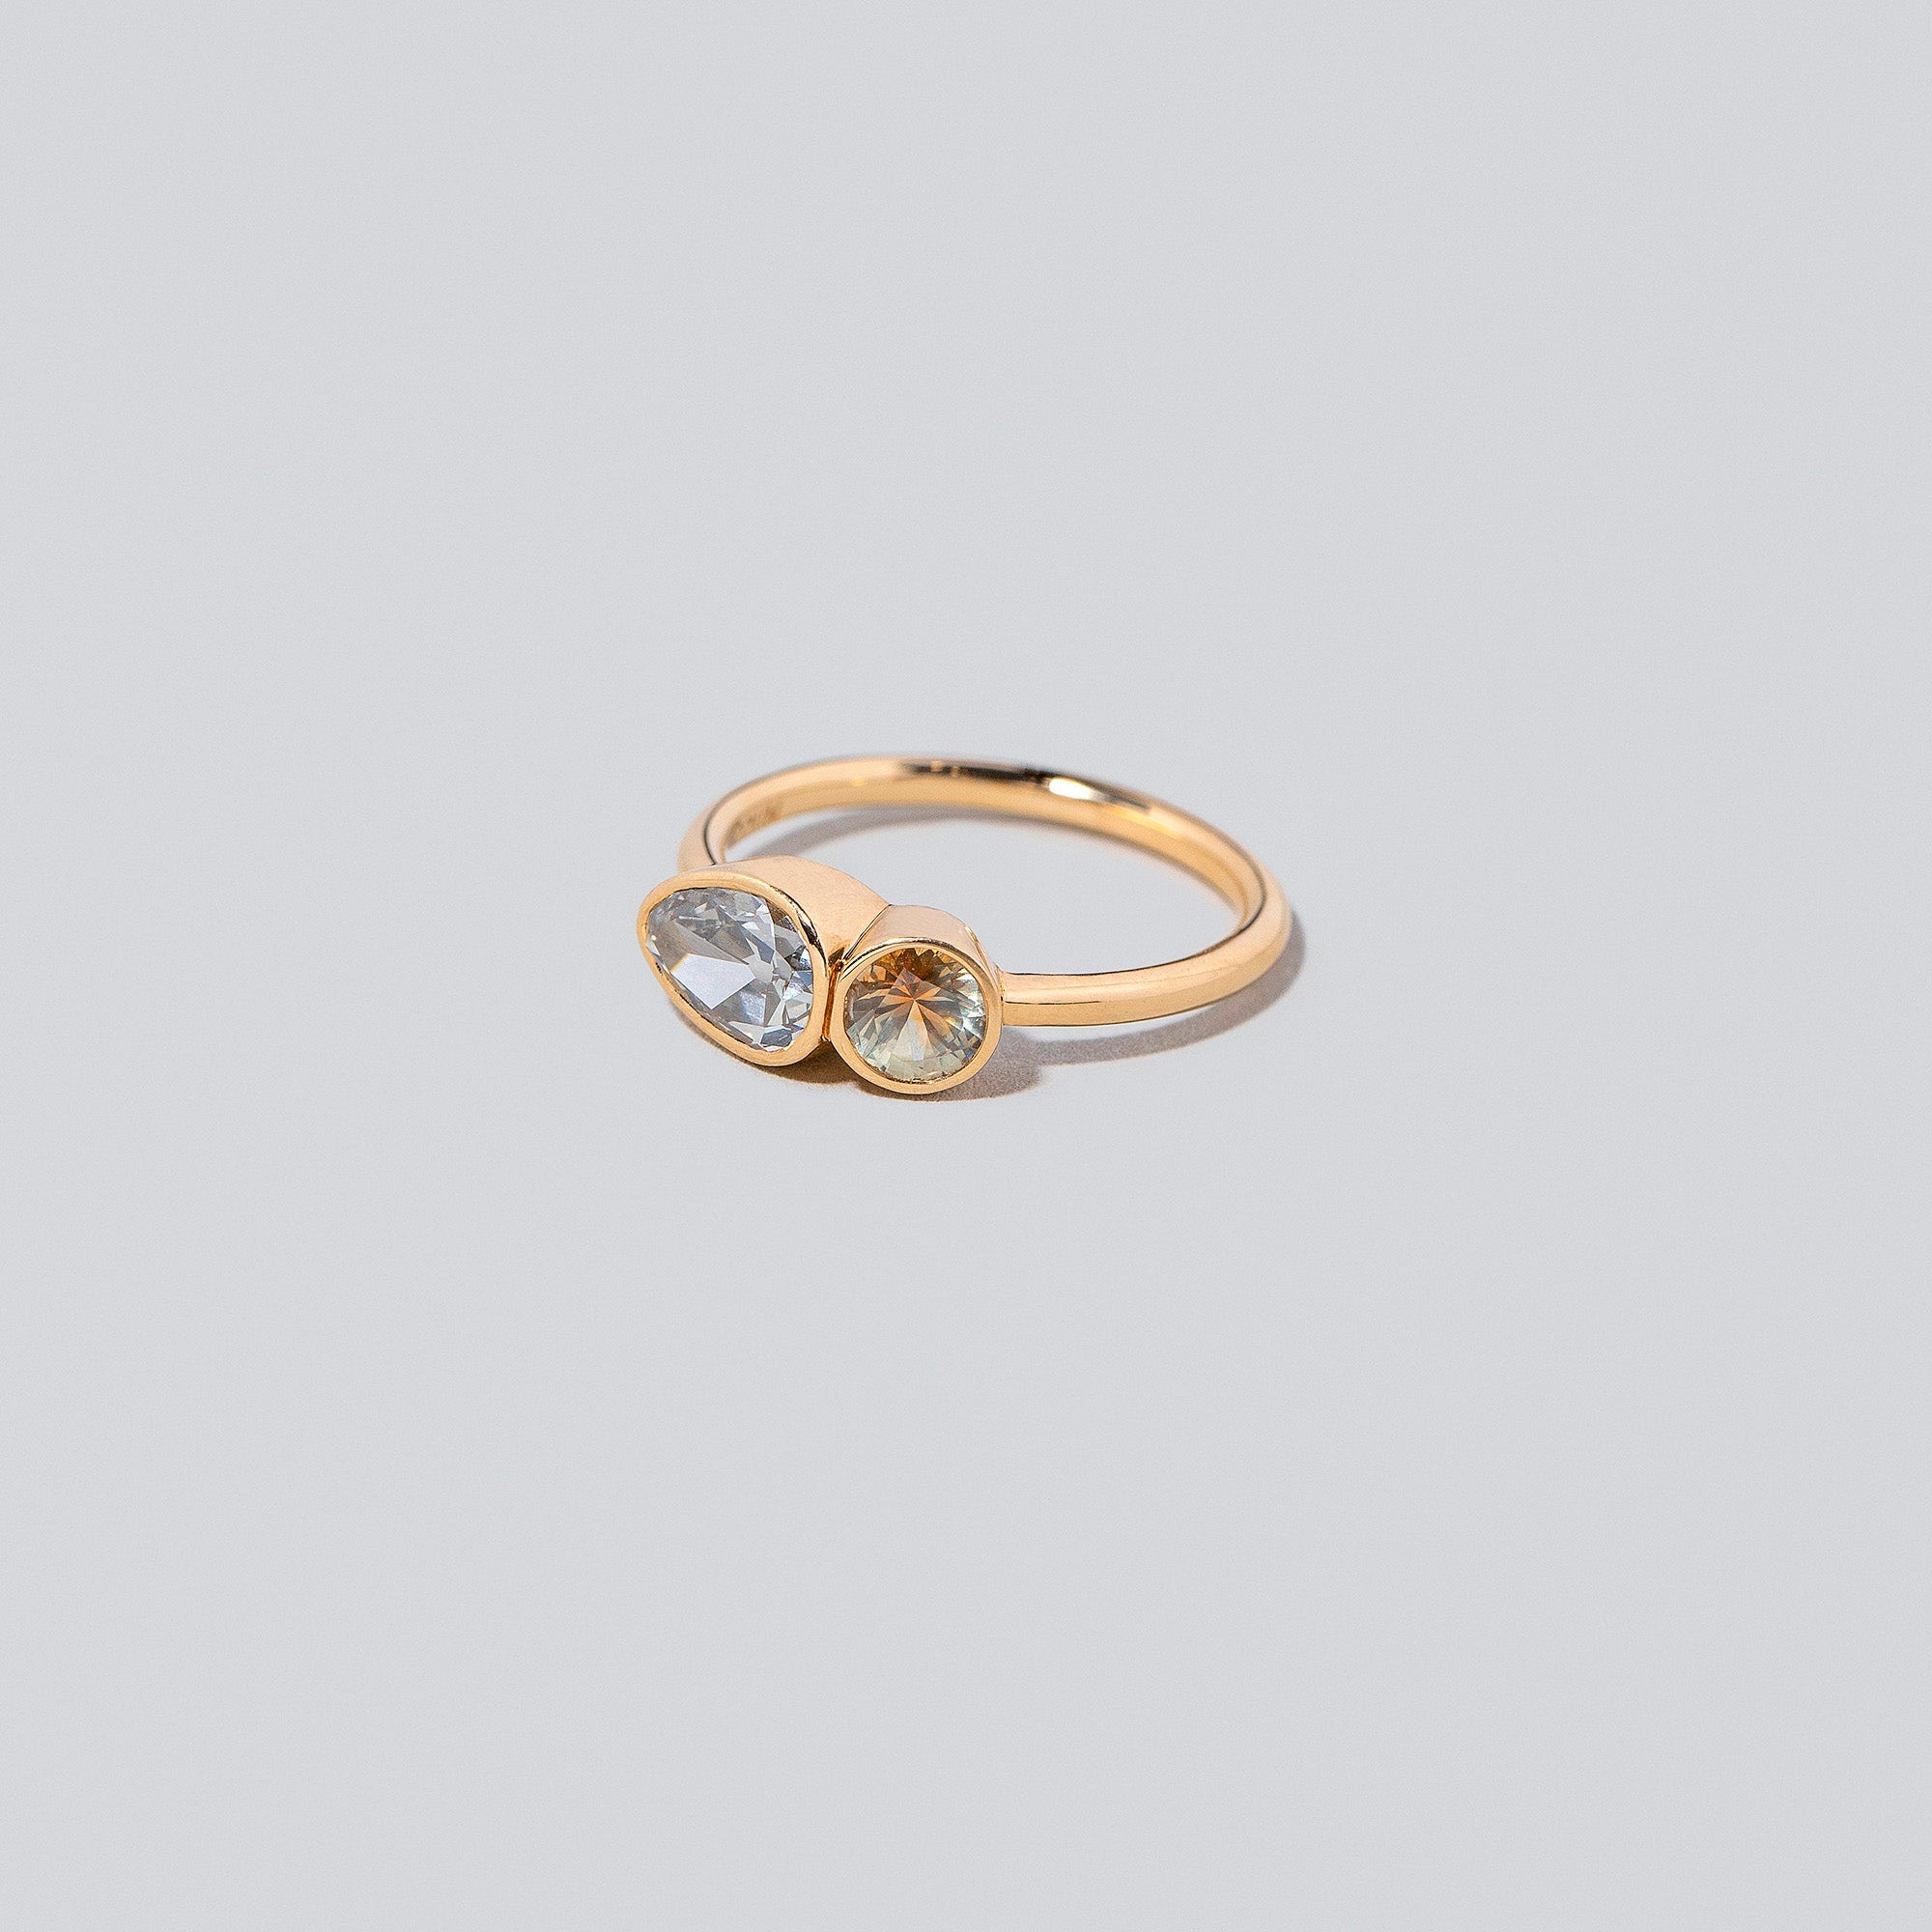 product_details:: Assal Ring on light color background.